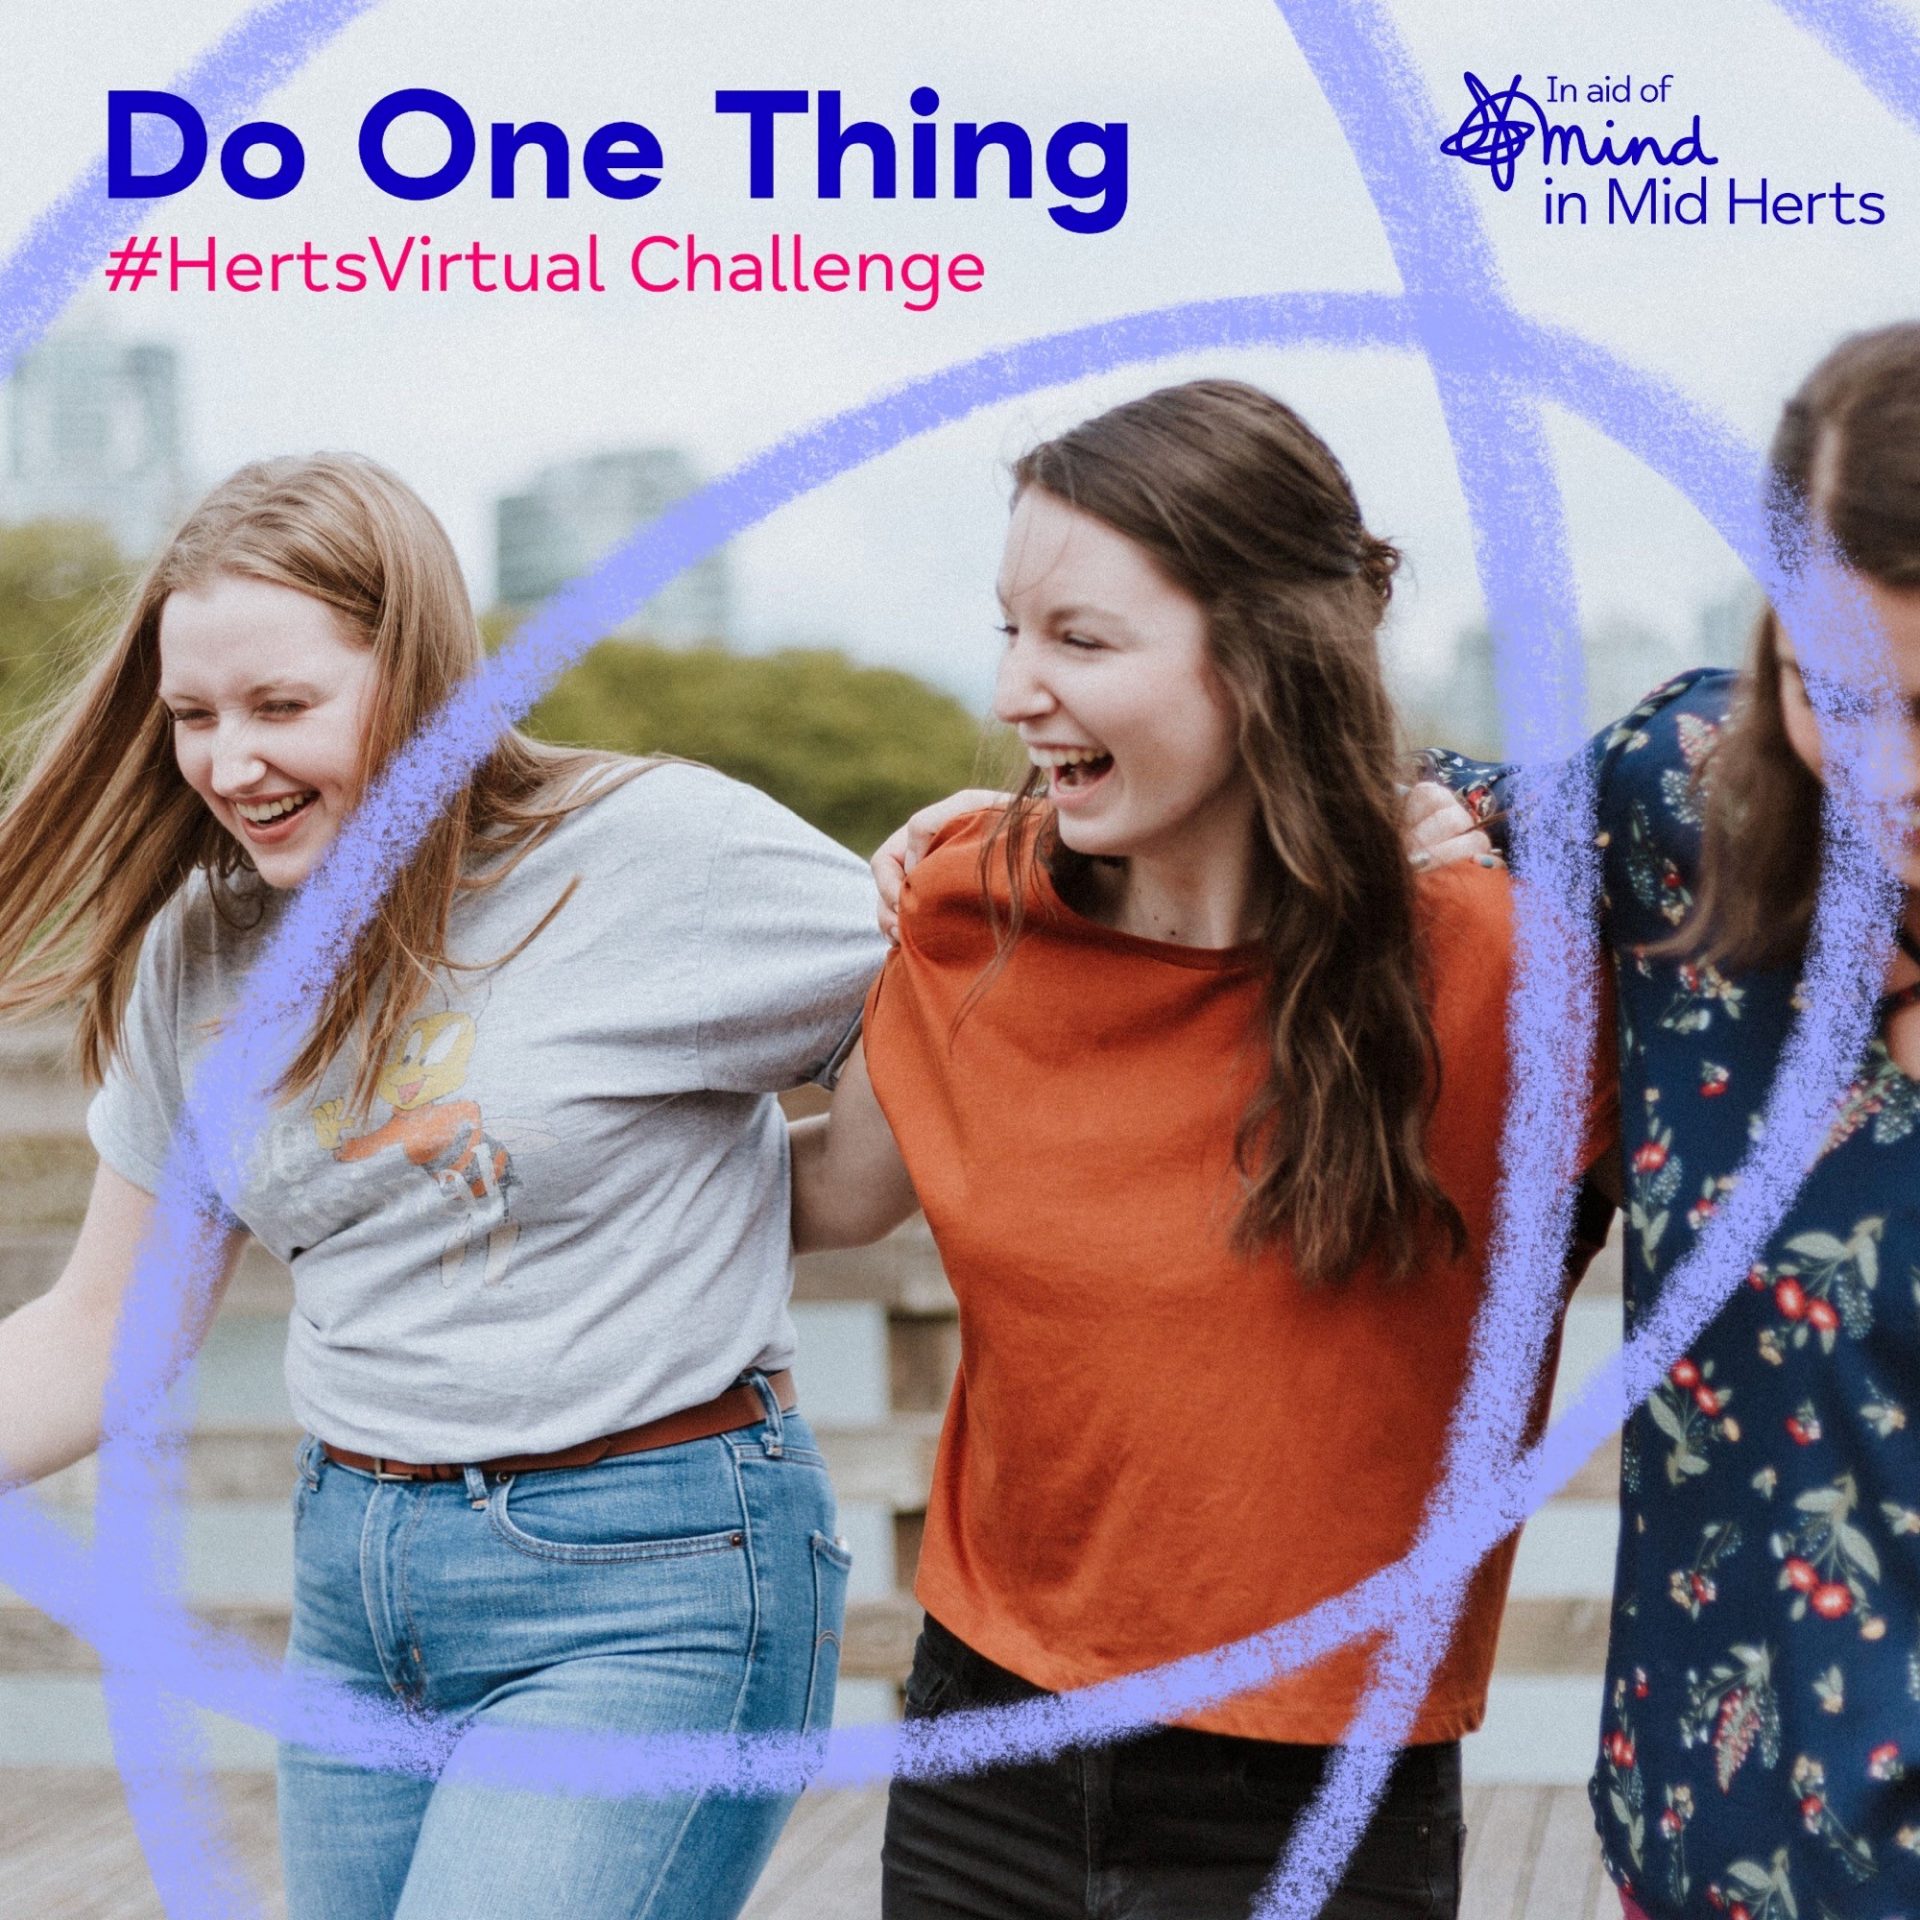 Do One Thing – Sign up for our new #HertsVirtualChallenge